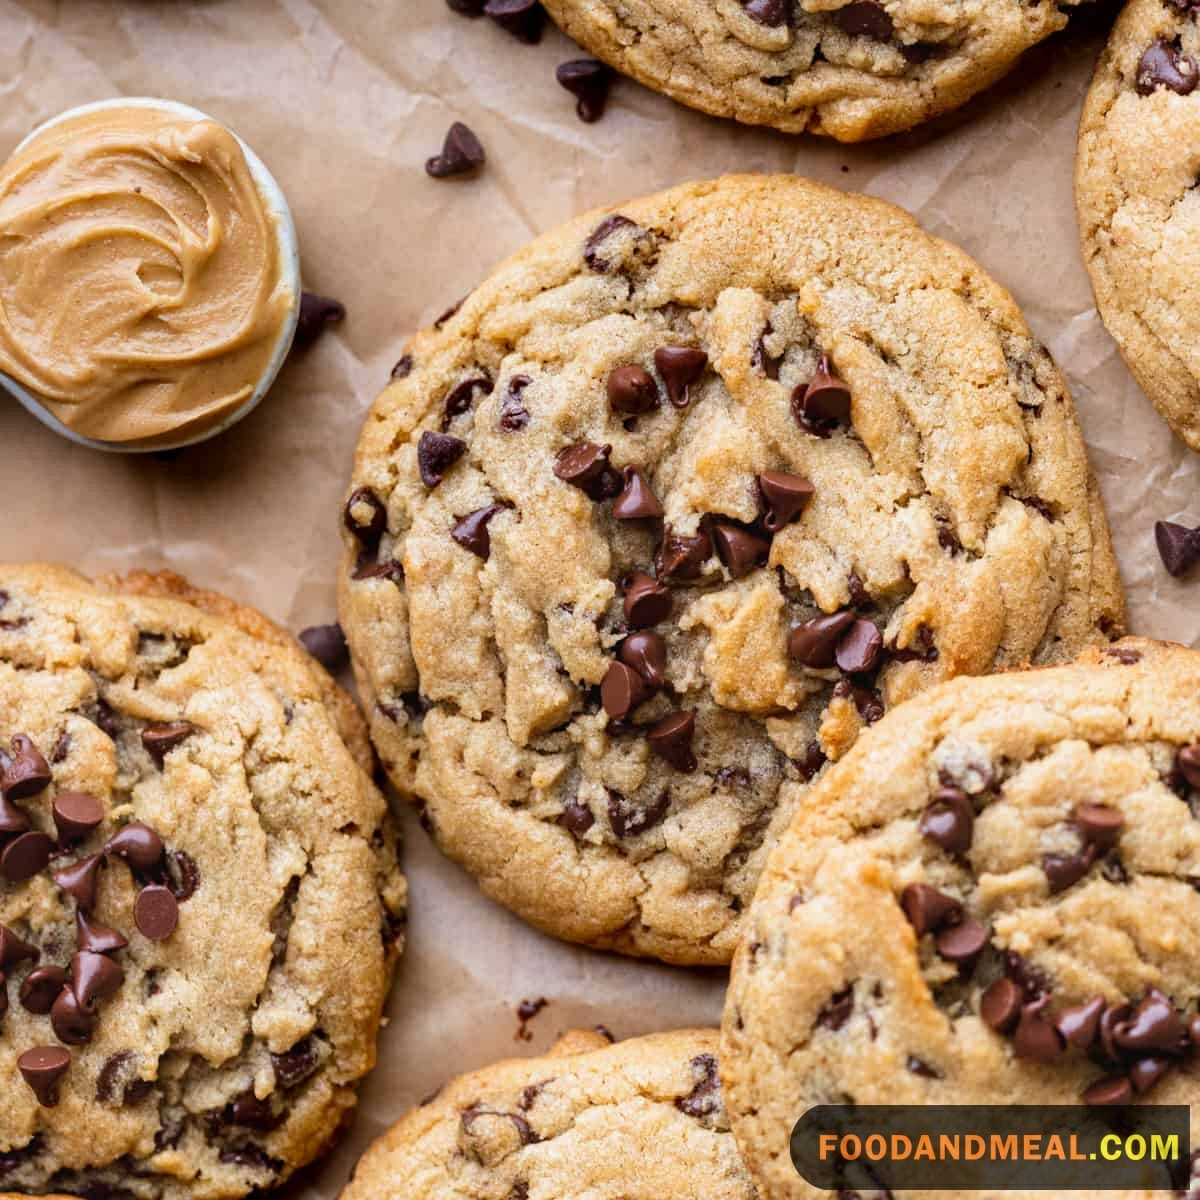  Peanut Butter Chocolate Chip Cookies